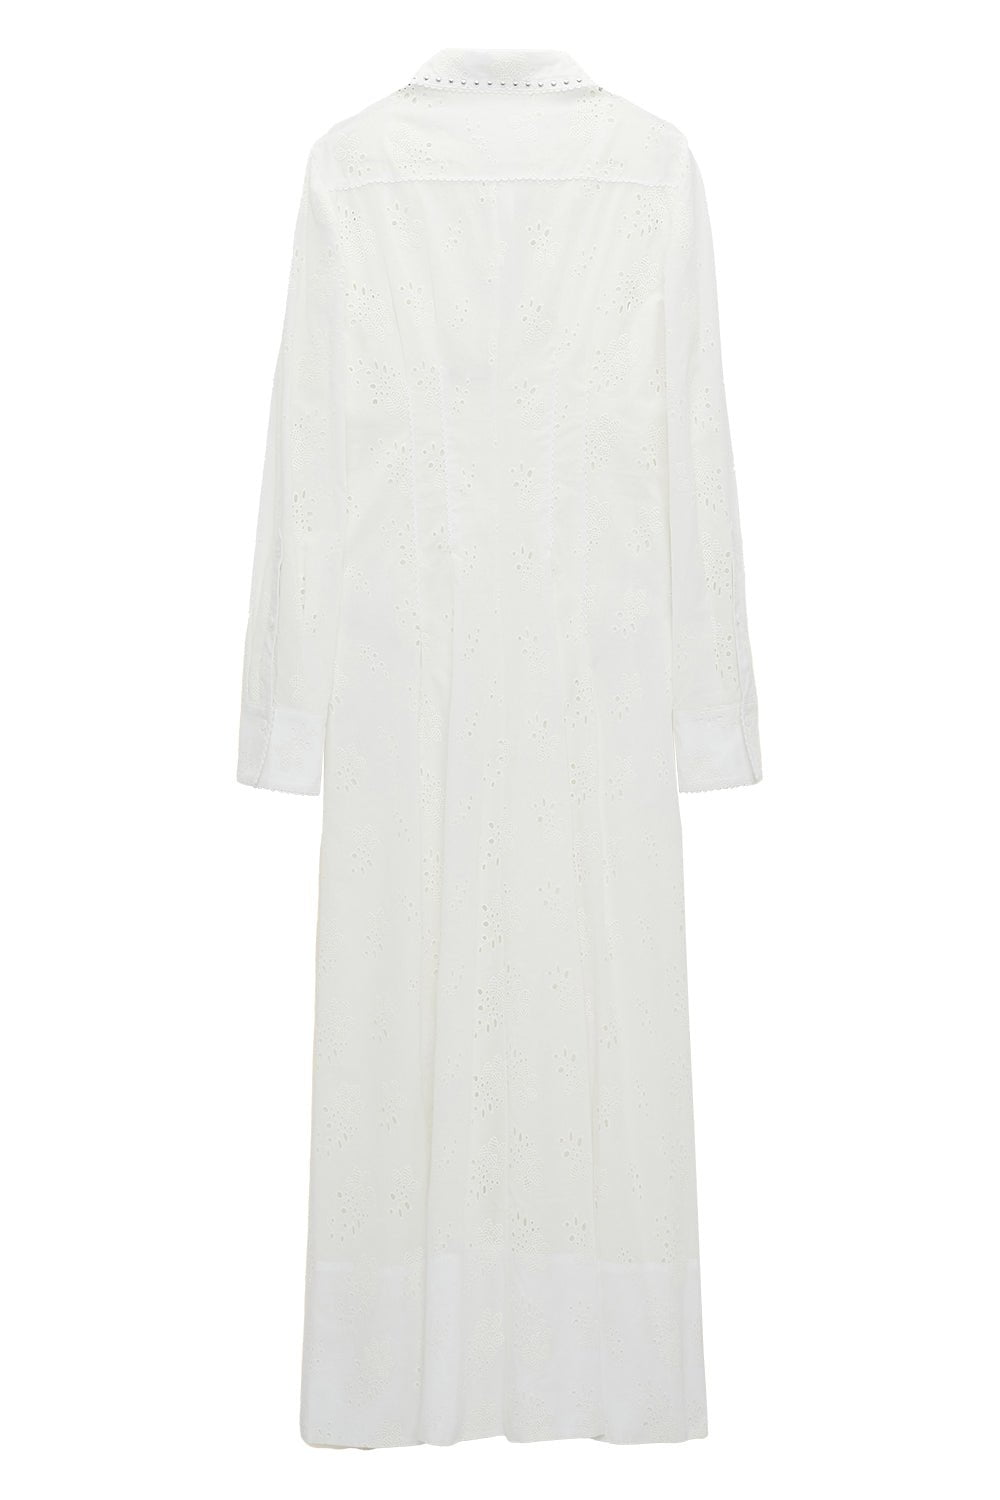 DOROTHEE SCHUMACHER-Embroidered Ease Dress-